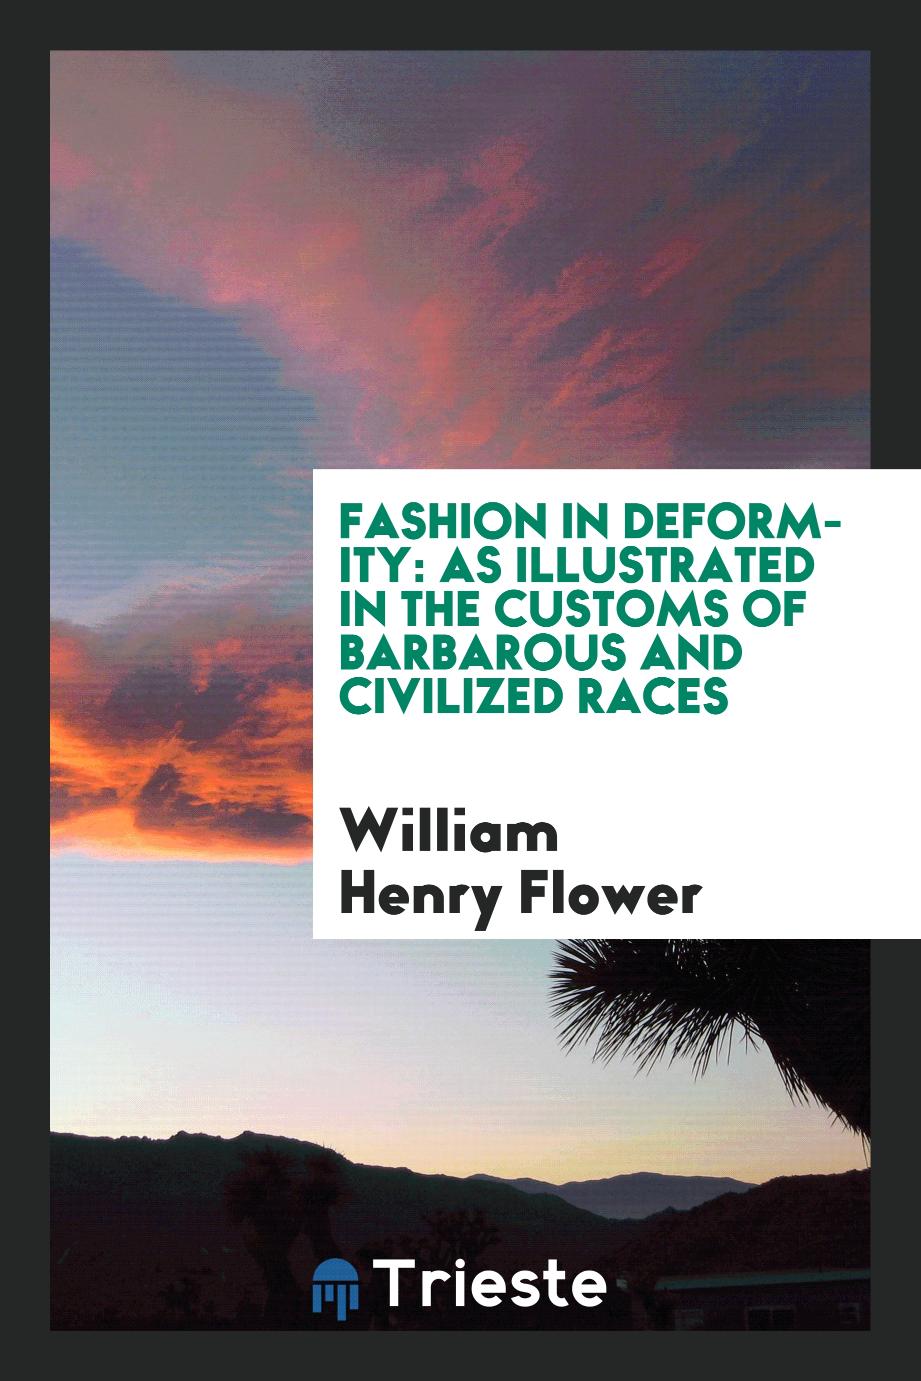 William Henry Flower - Fashion in deformity: as illustrated in the customs of barbarous and civilized races